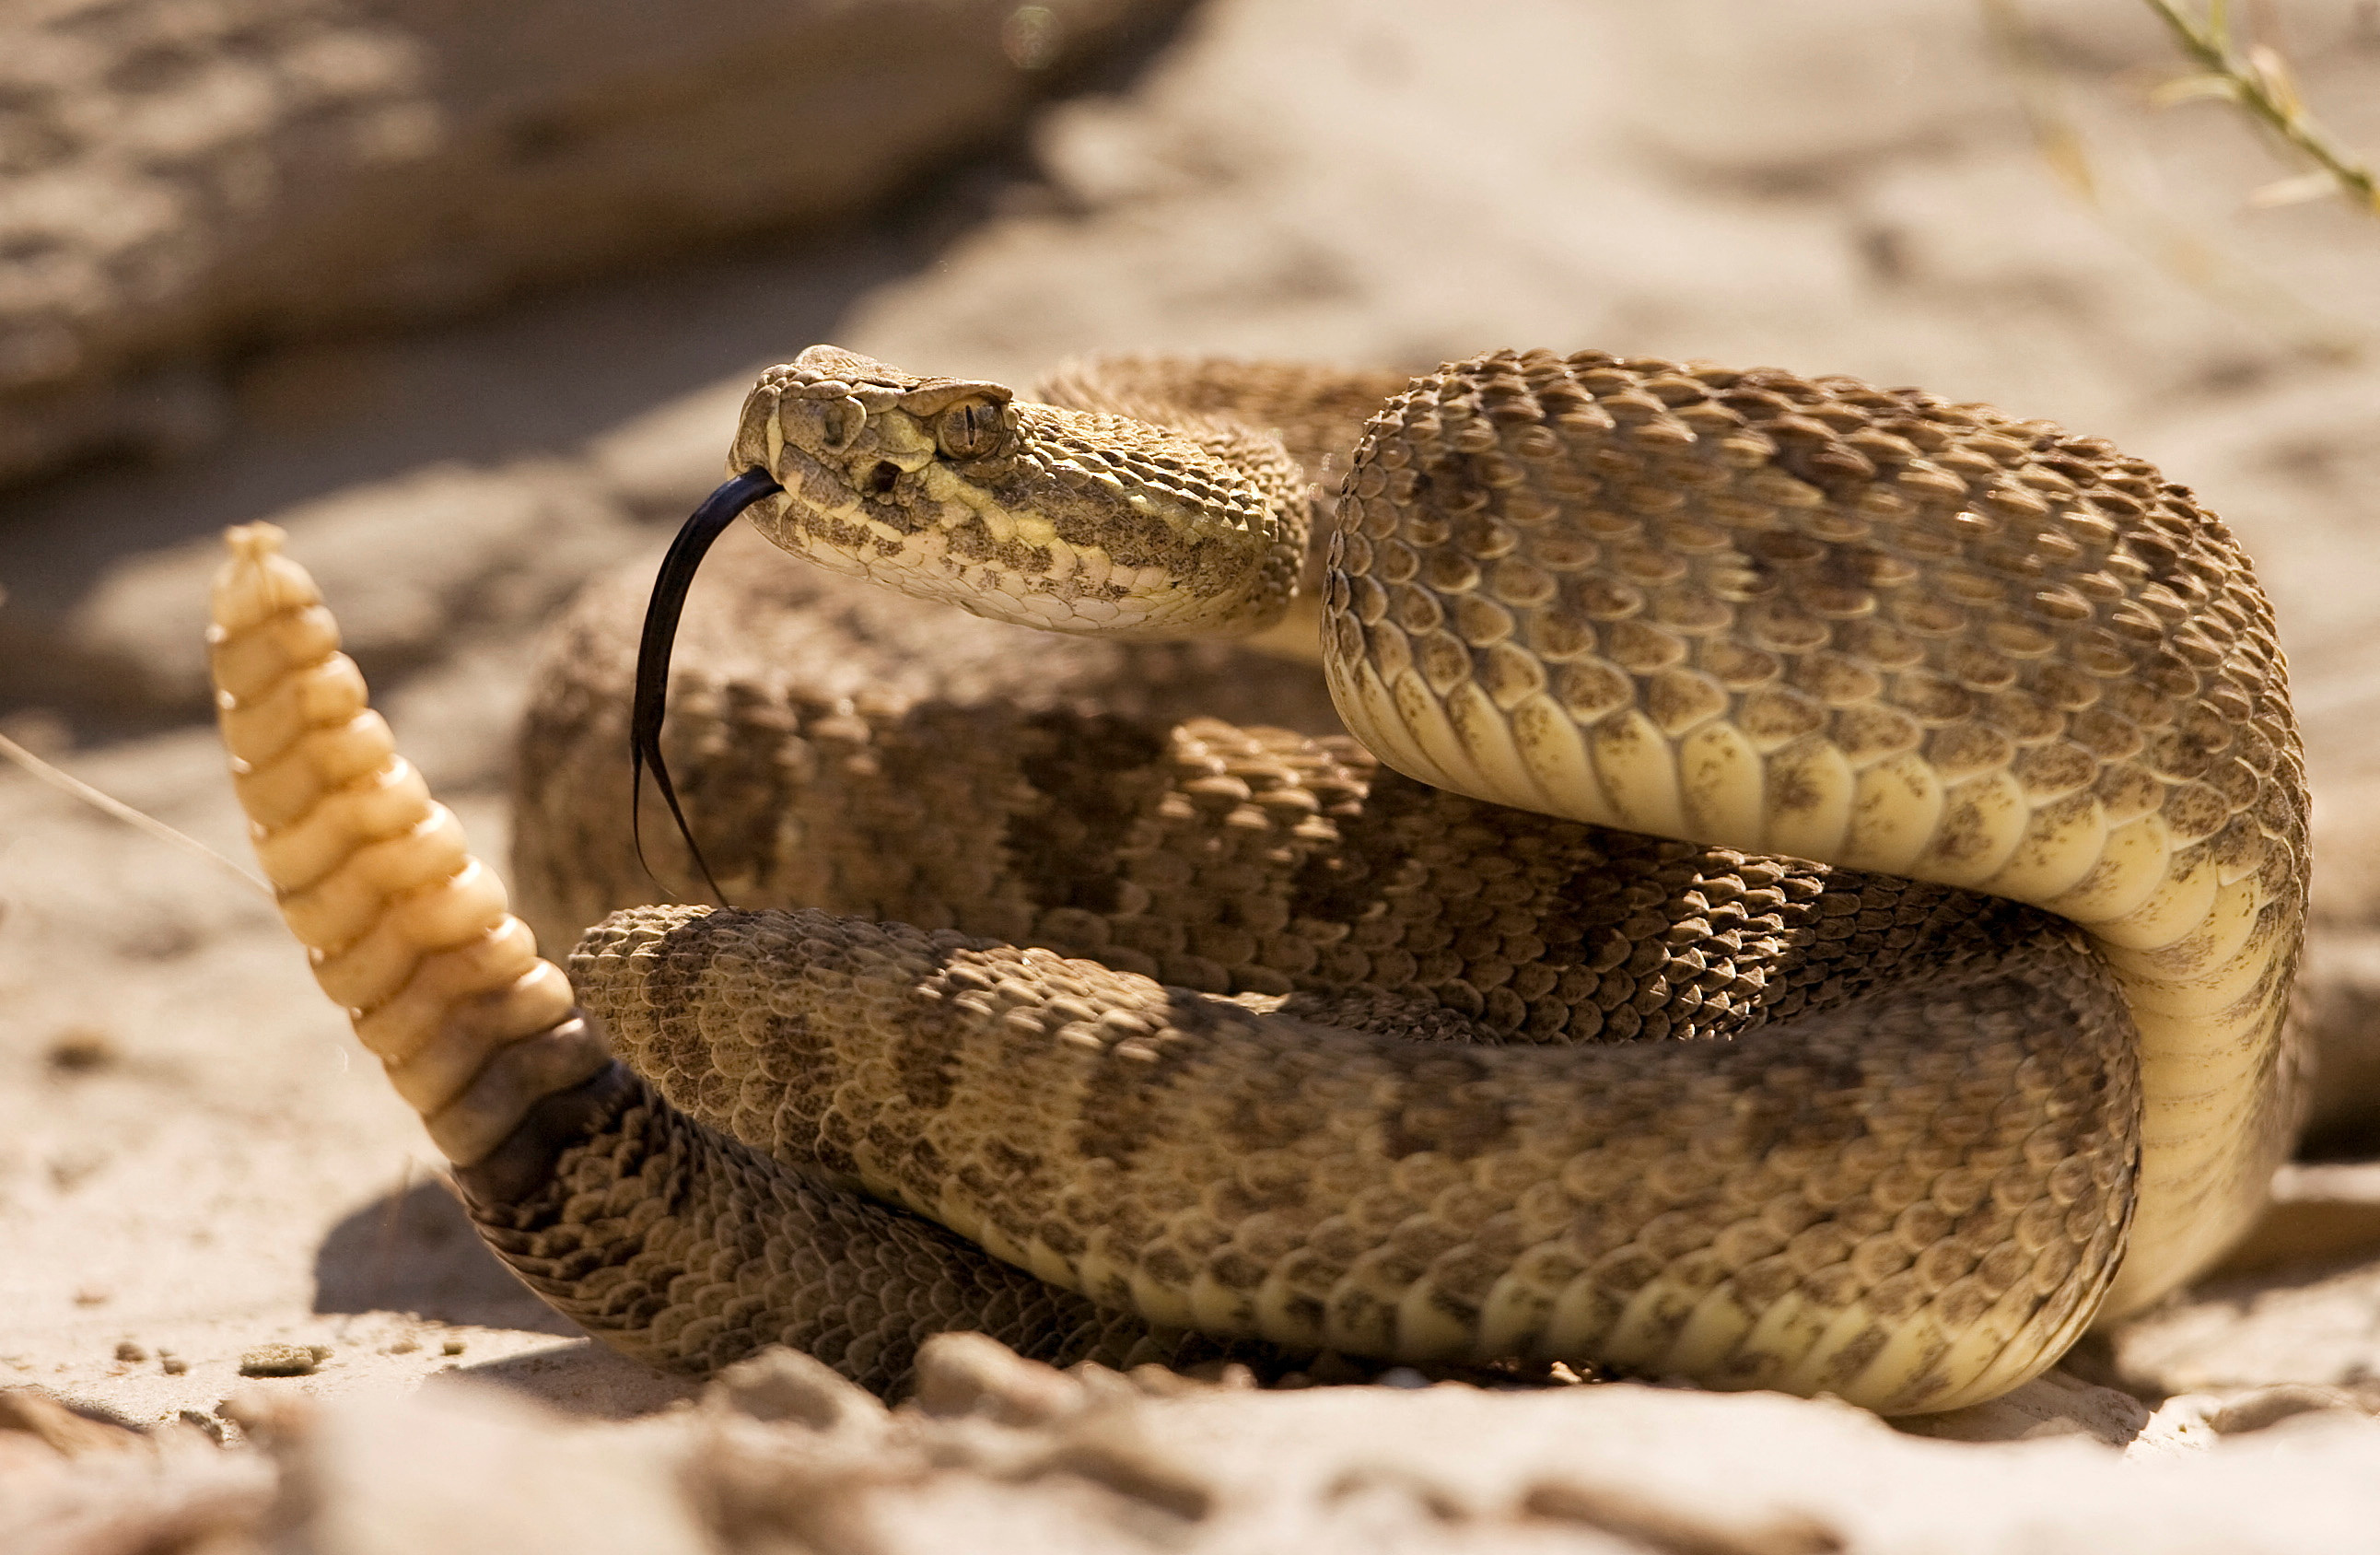 Prairie rattlesnake warns approaching hikers with rattle of his tail in Dinosaur Provincial Park, Alberta.